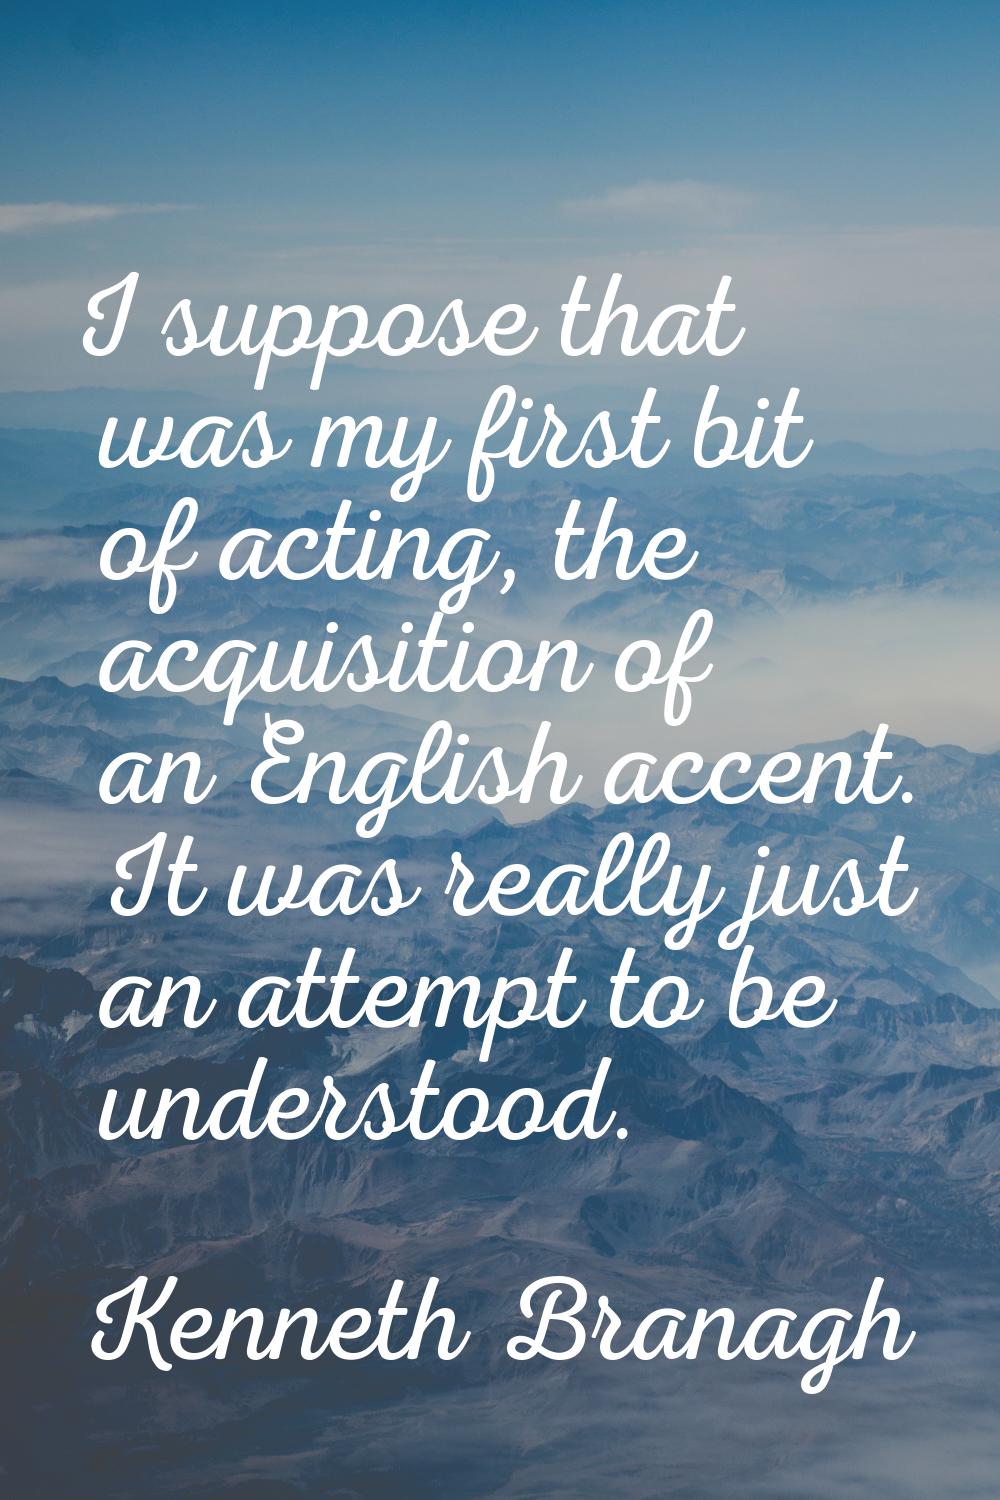 I suppose that was my first bit of acting, the acquisition of an English accent. It was really just